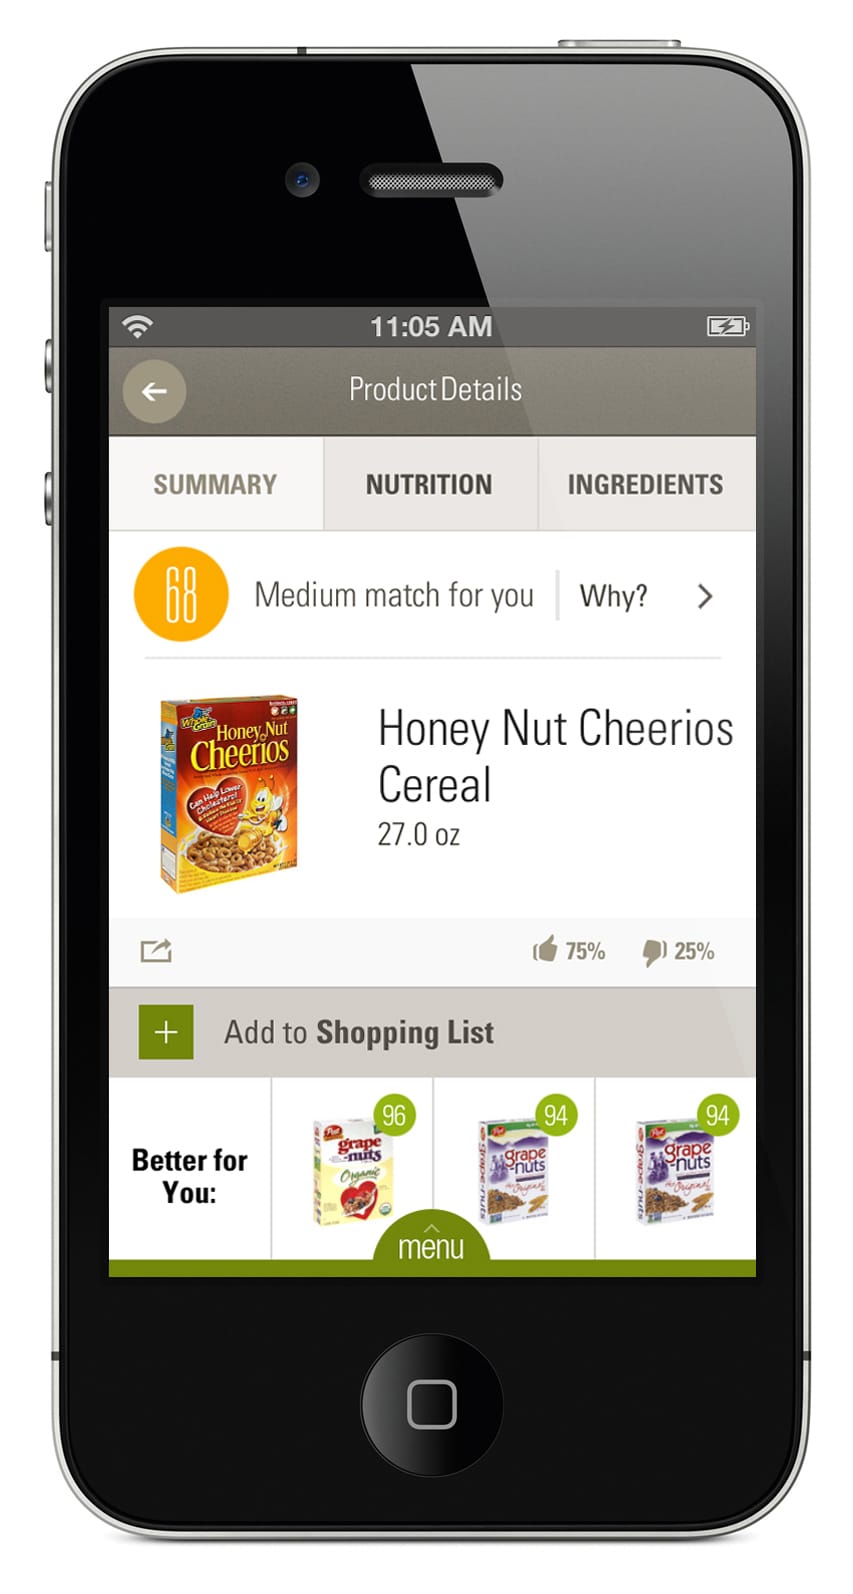 The ShopWell app allows consumers to scan food labels and receive comprehensible, personalized information.